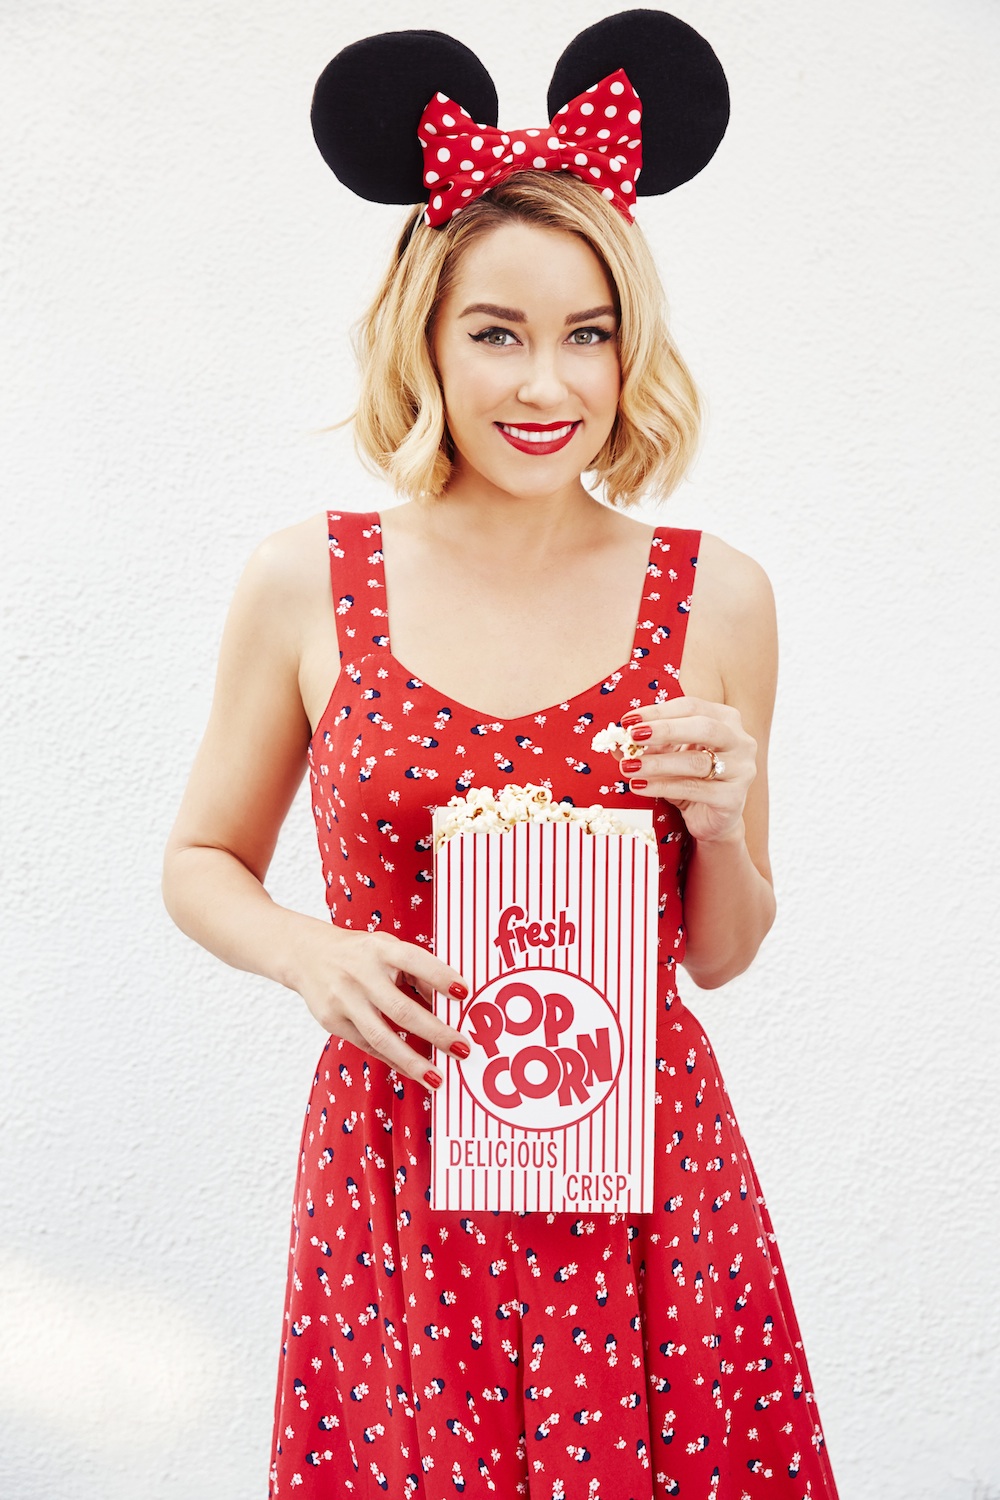 Lauren Conrad’s new Disney Minnie Mouse collection #MinnieStyle vintage-inspired dress | Focused on the Magic